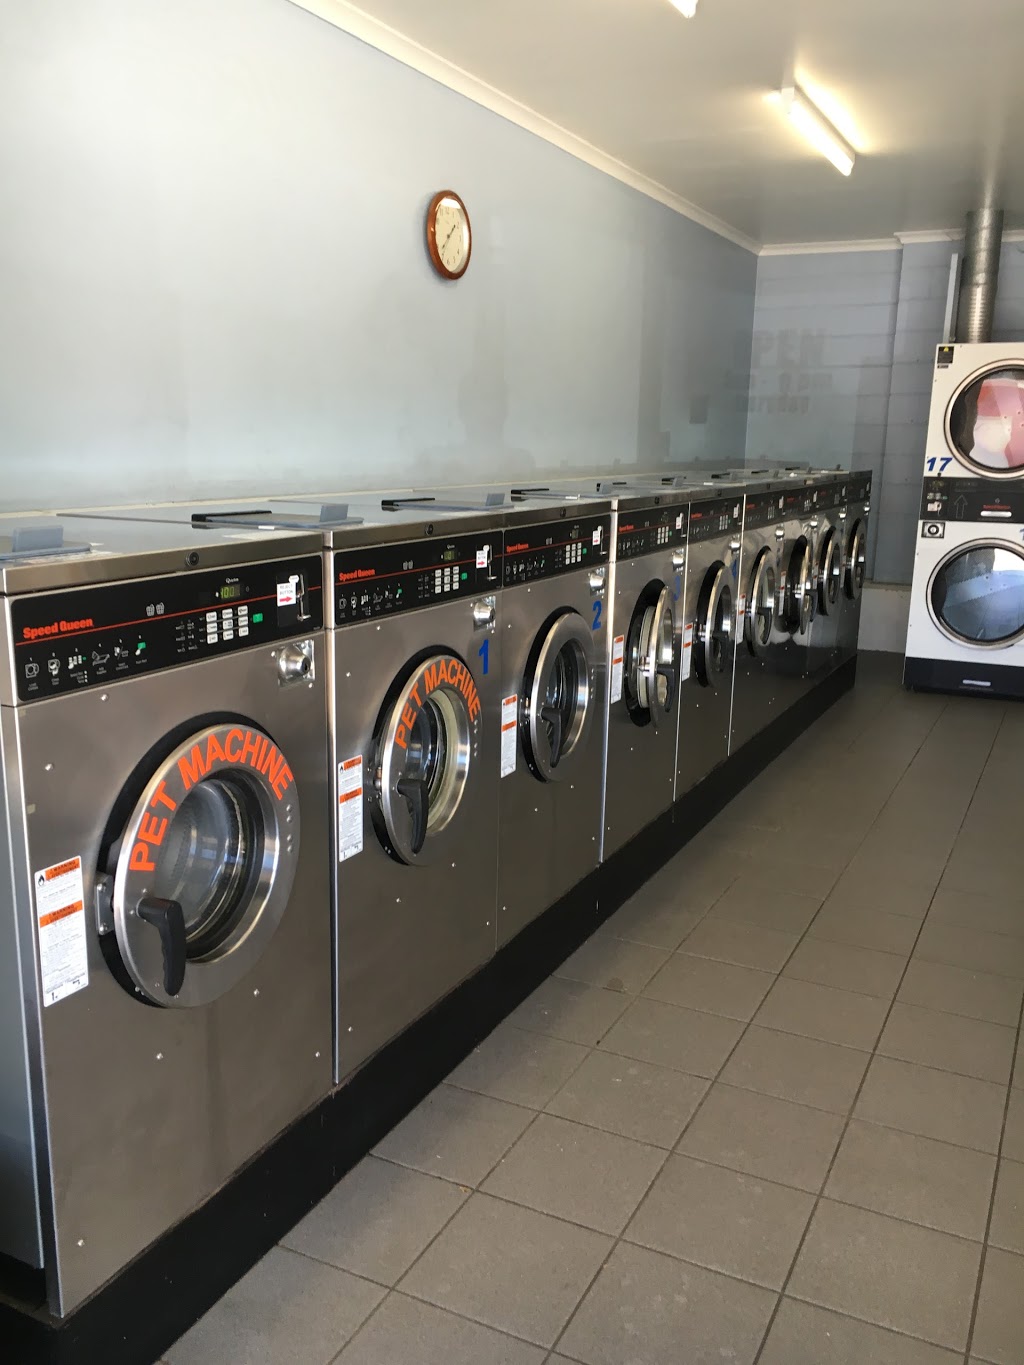 Gympie Laundromat River Road | laundry | 107 River Rd, Gympie QLD 4570, Australia | 0417731470 OR +61 417 731 470